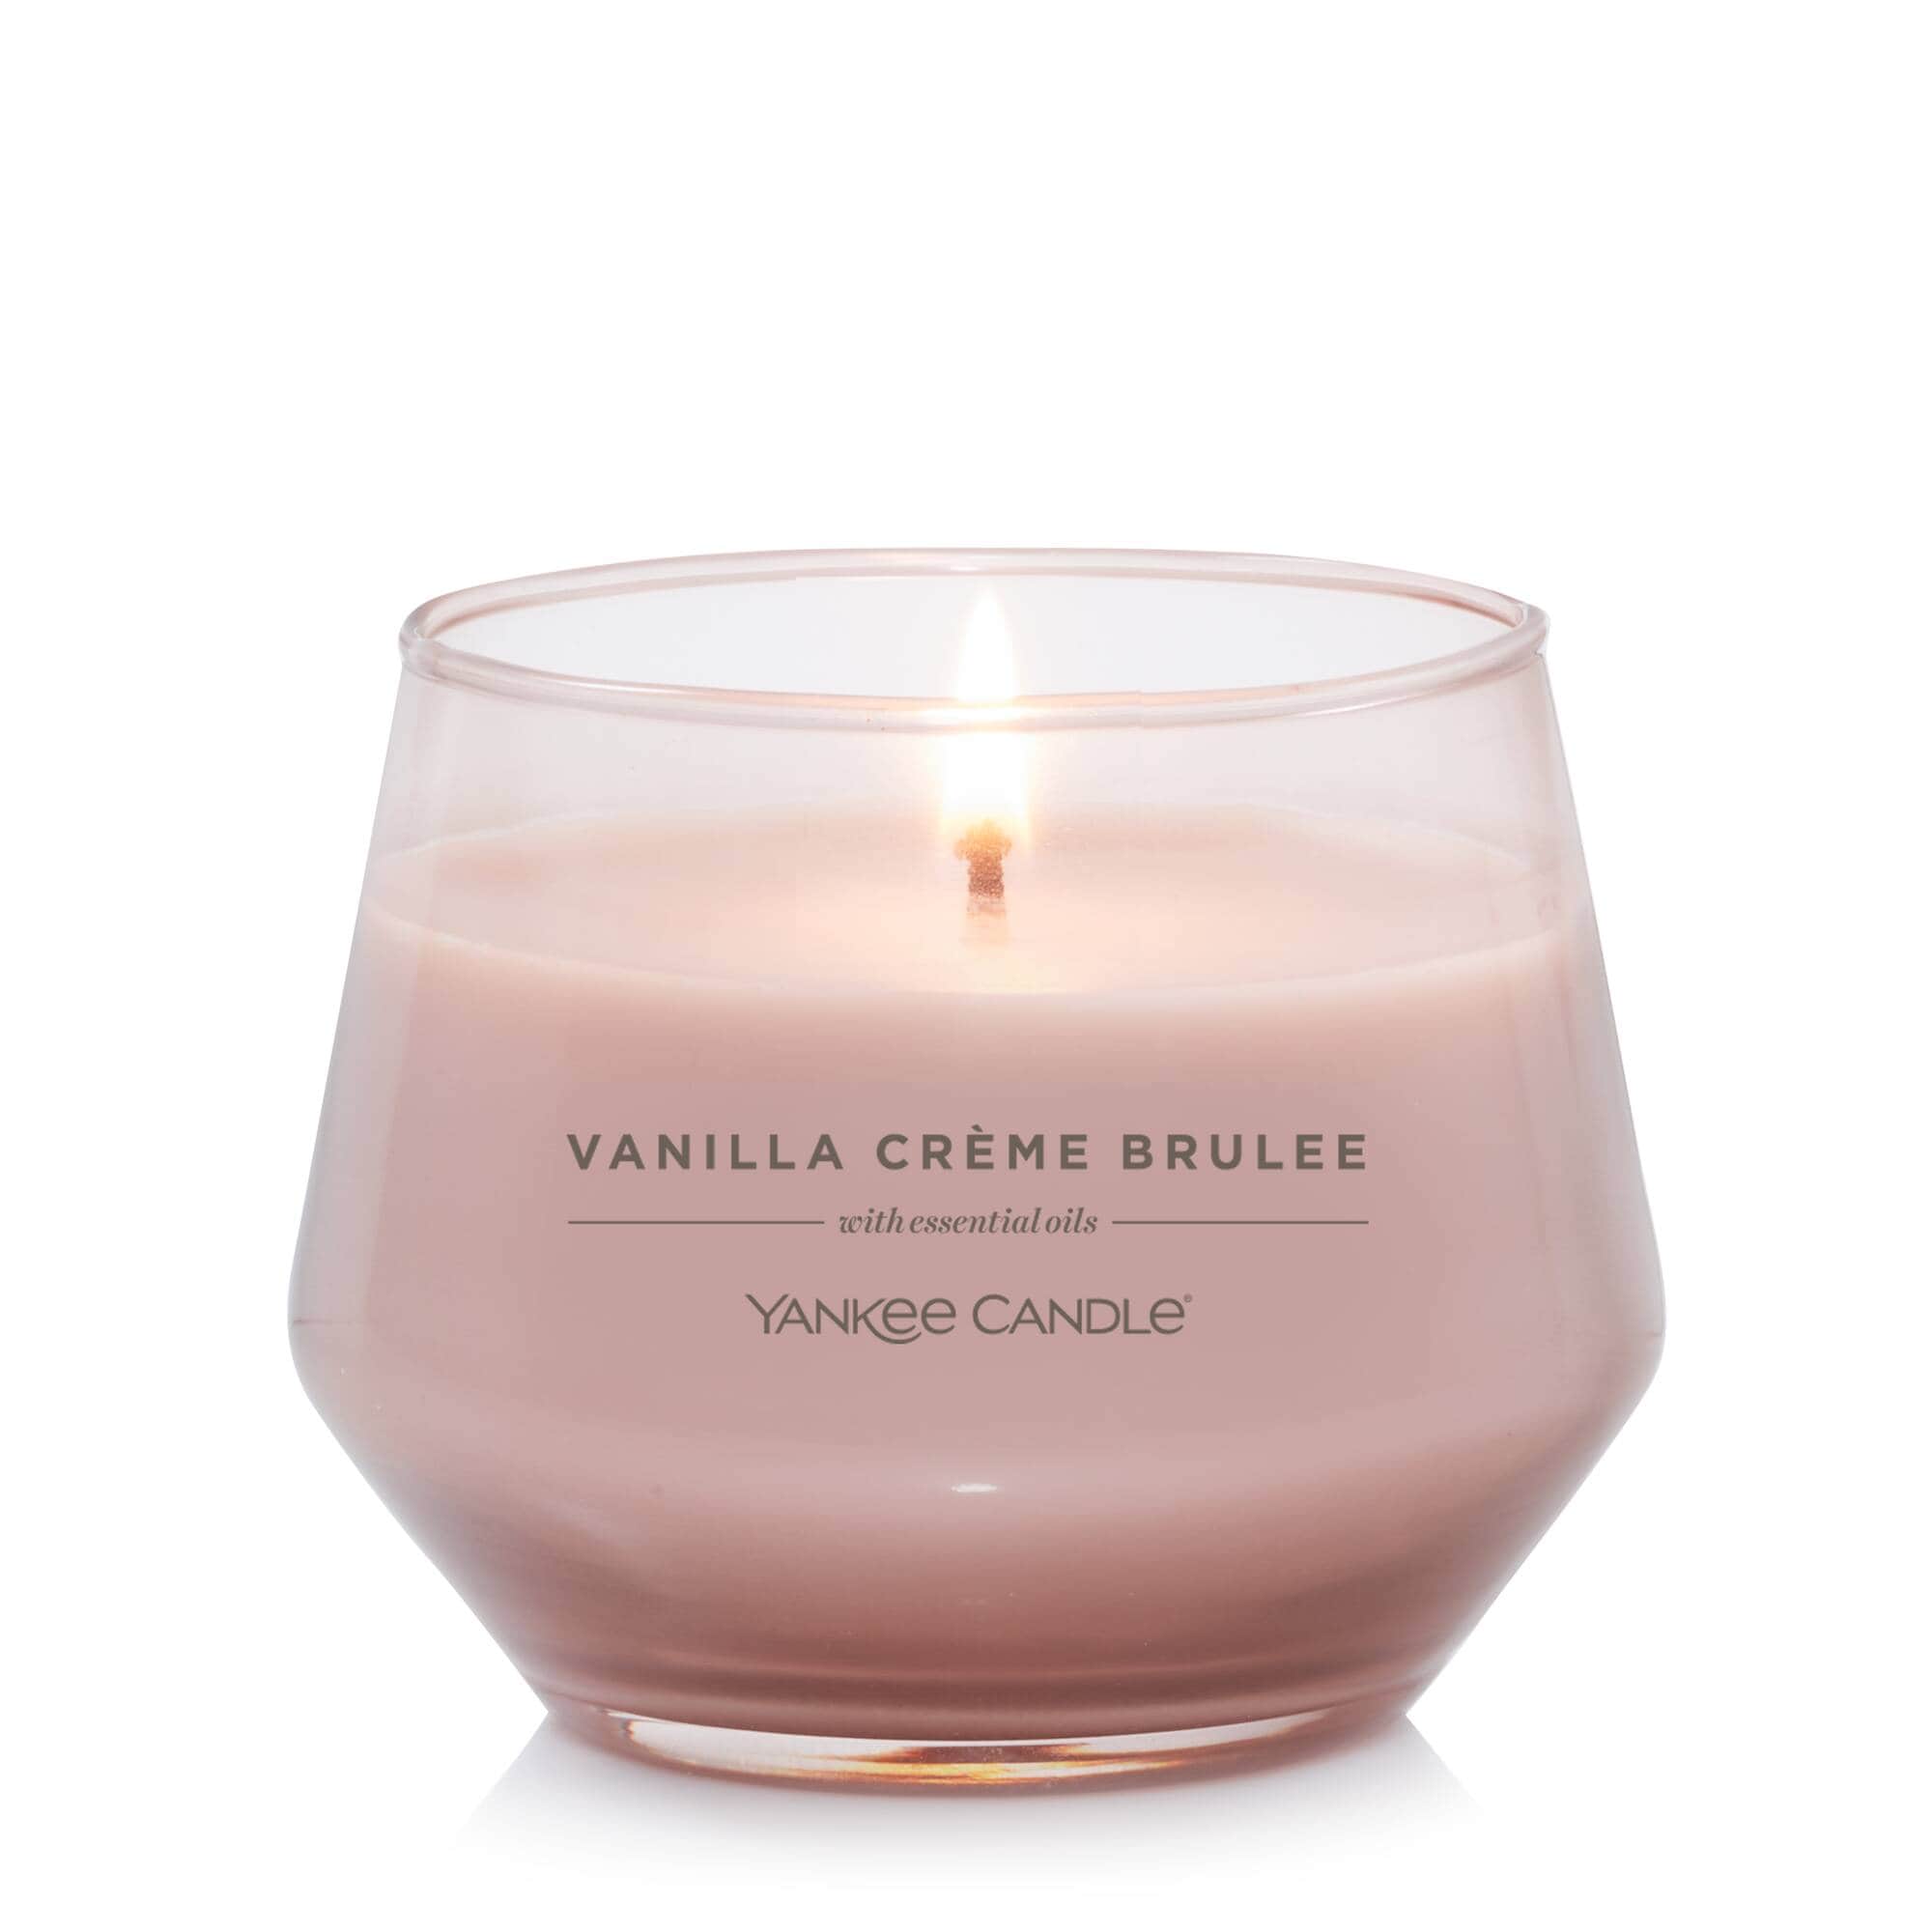 The Yankee Candle Company 1-Wick Vanilla Crème Brulee Brown/Tan